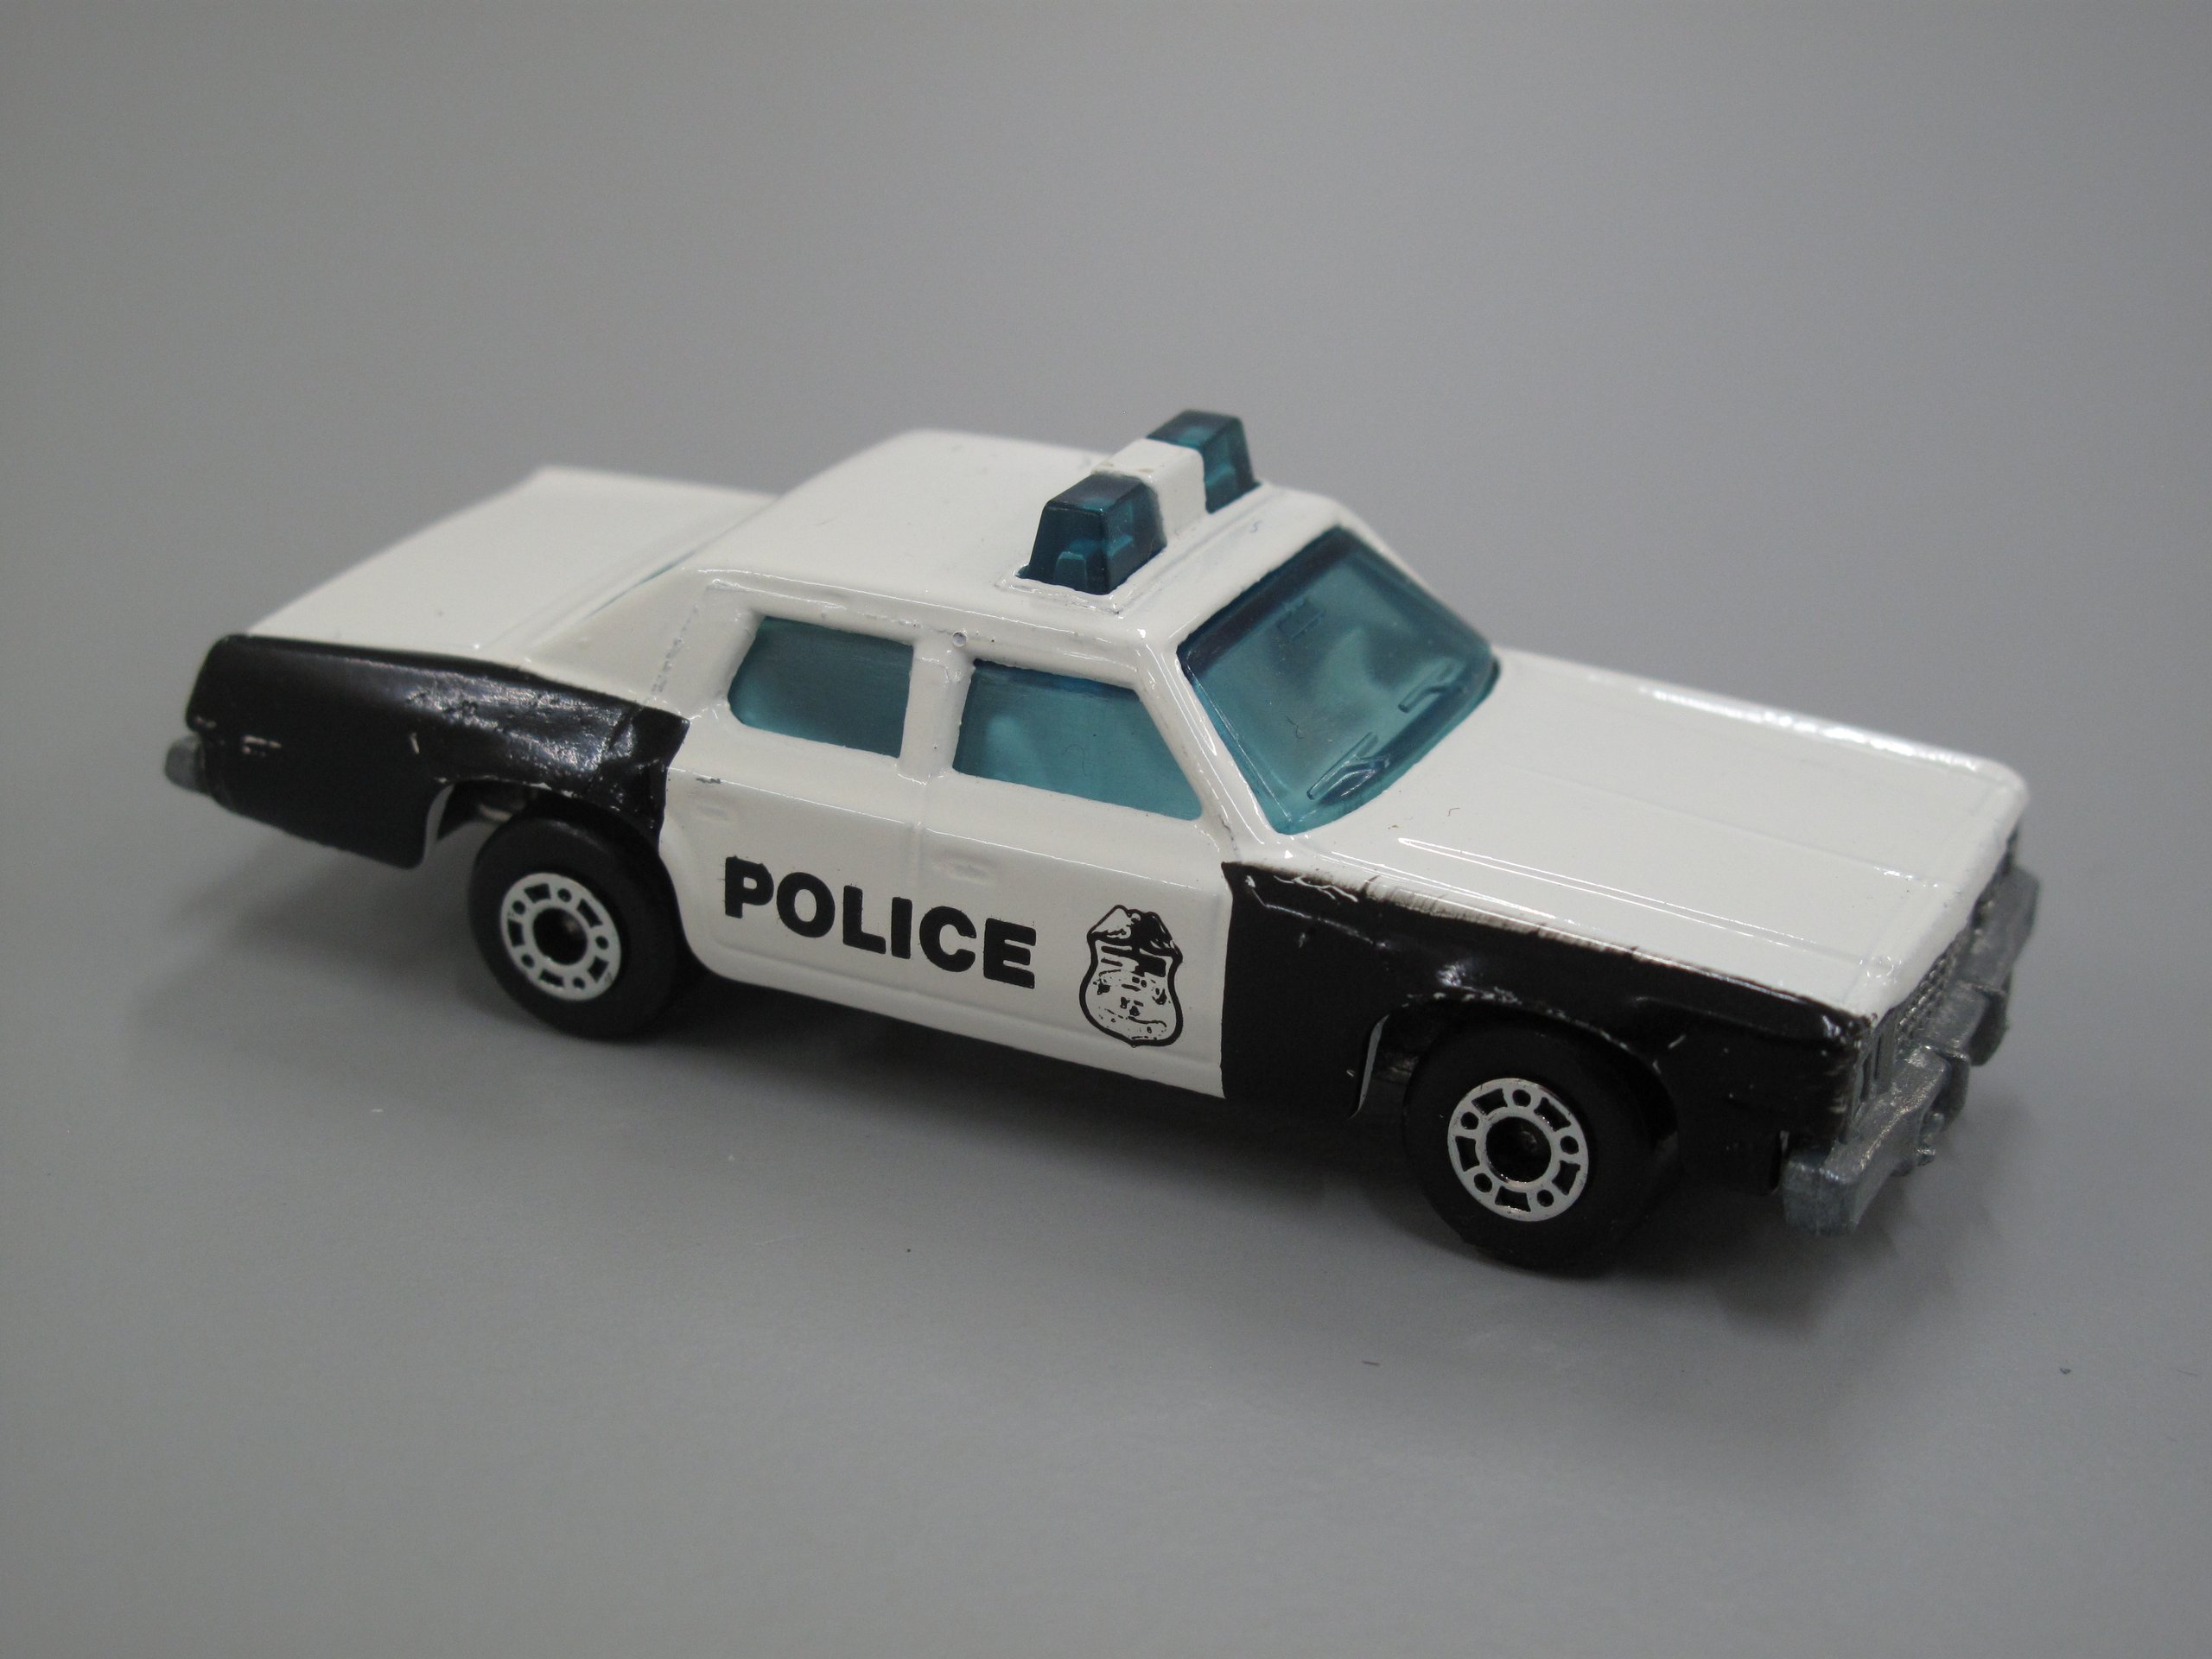 Toy matchbox Plymouth Gran Fury police car made by Lesney